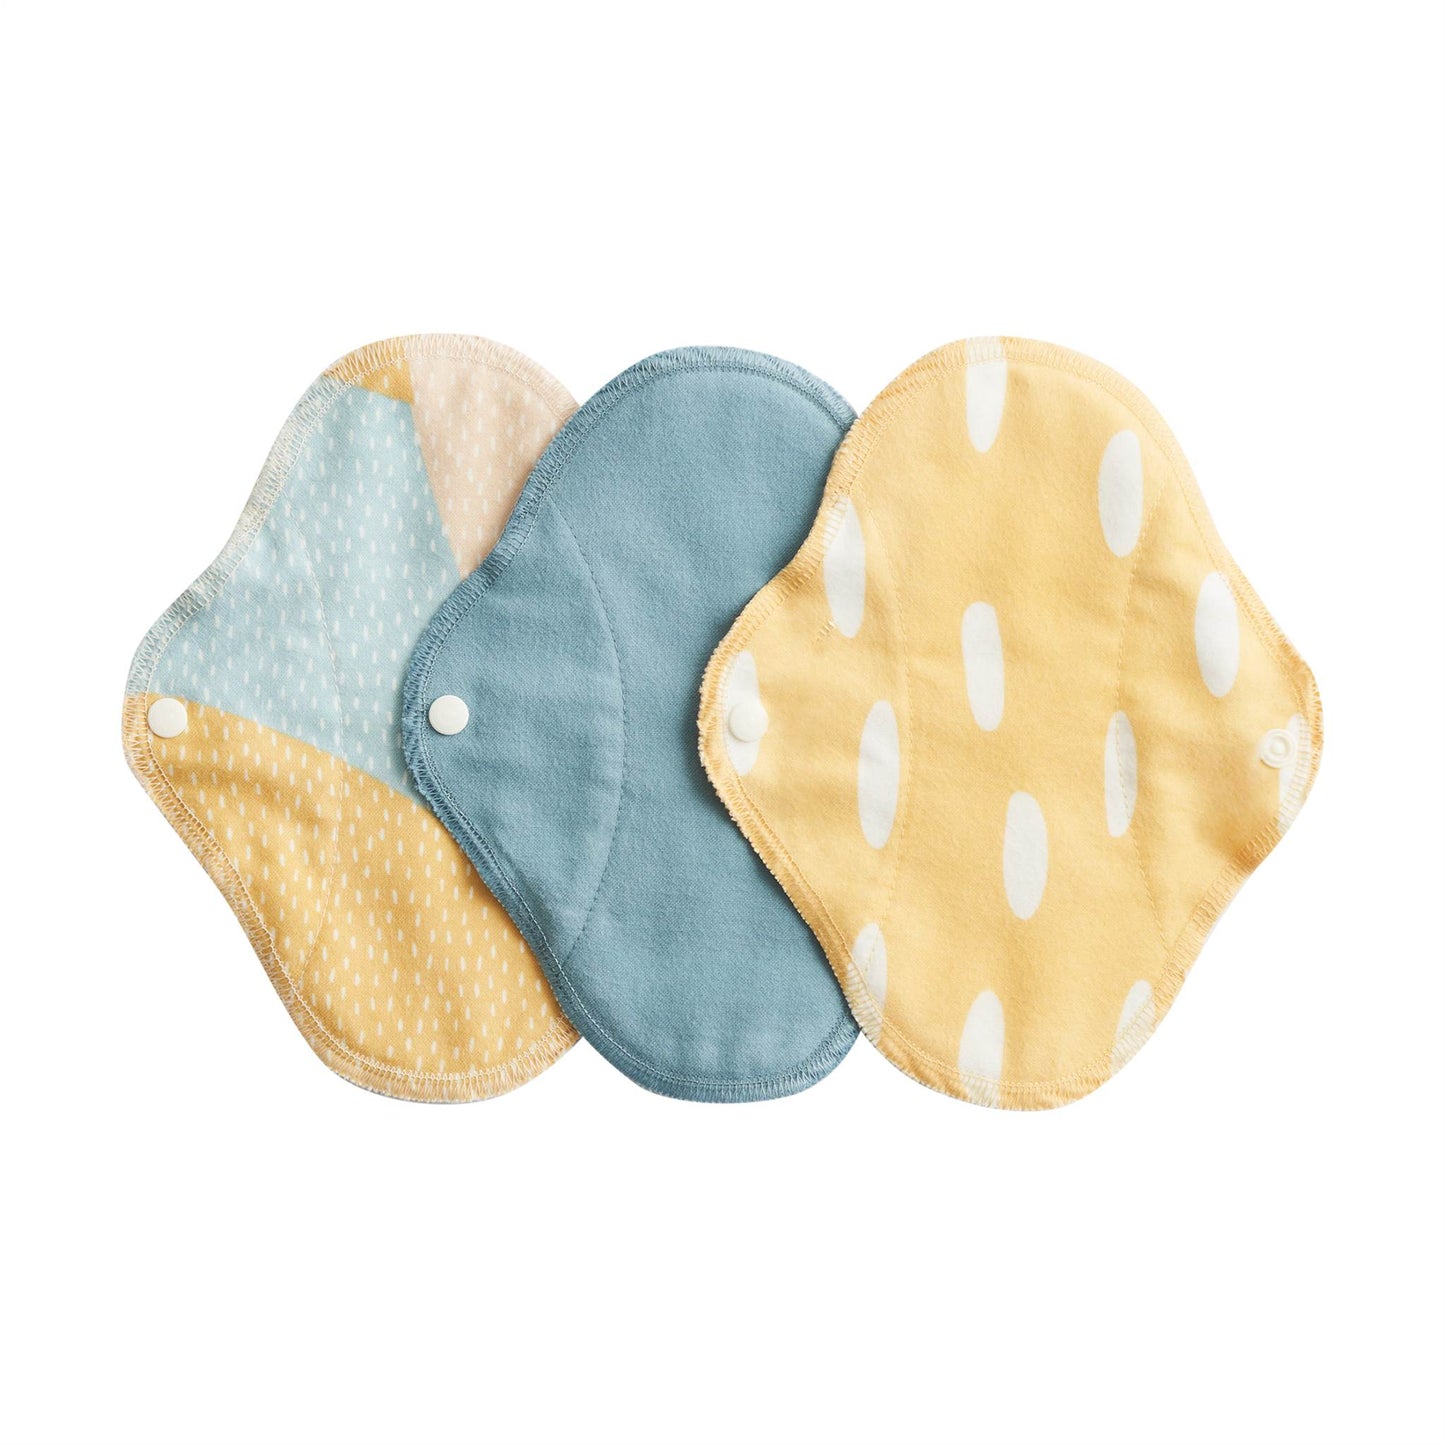 Imse Vimse Period Care Blue Sprinkle Reusable Cloth Pantyliner 3-Pack  - Classic - Imse Vimse